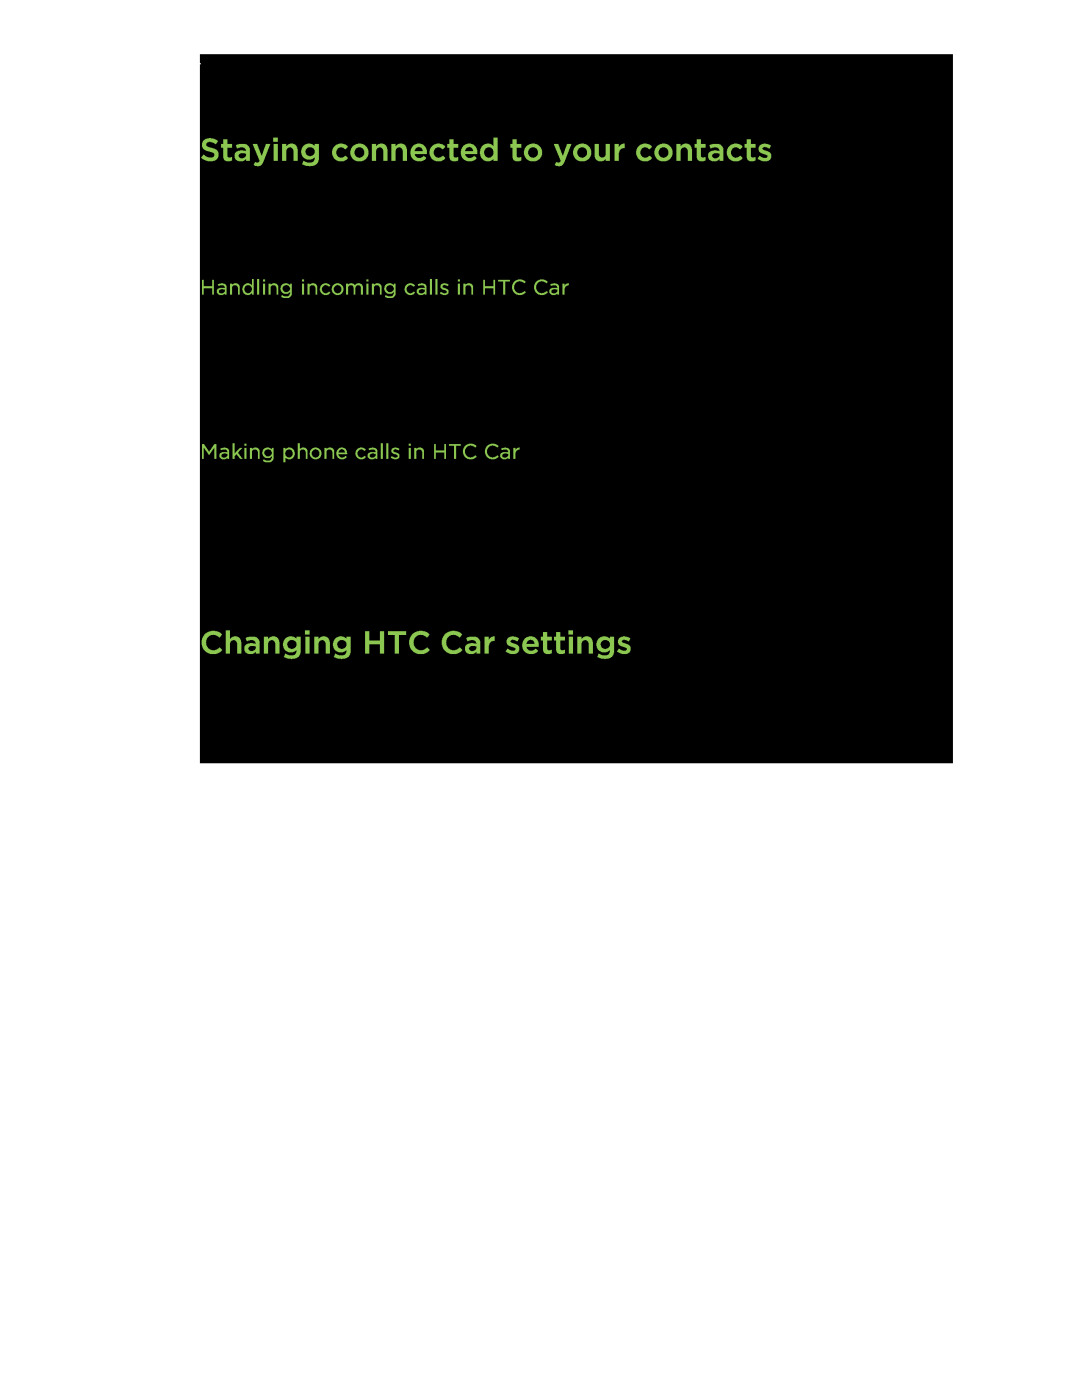 HTC C3HTCONEV4GBUNLOCKEDBLACK Staying connected to your contacts, Changing HTC Car settings, Making phone calls in HTC Car 